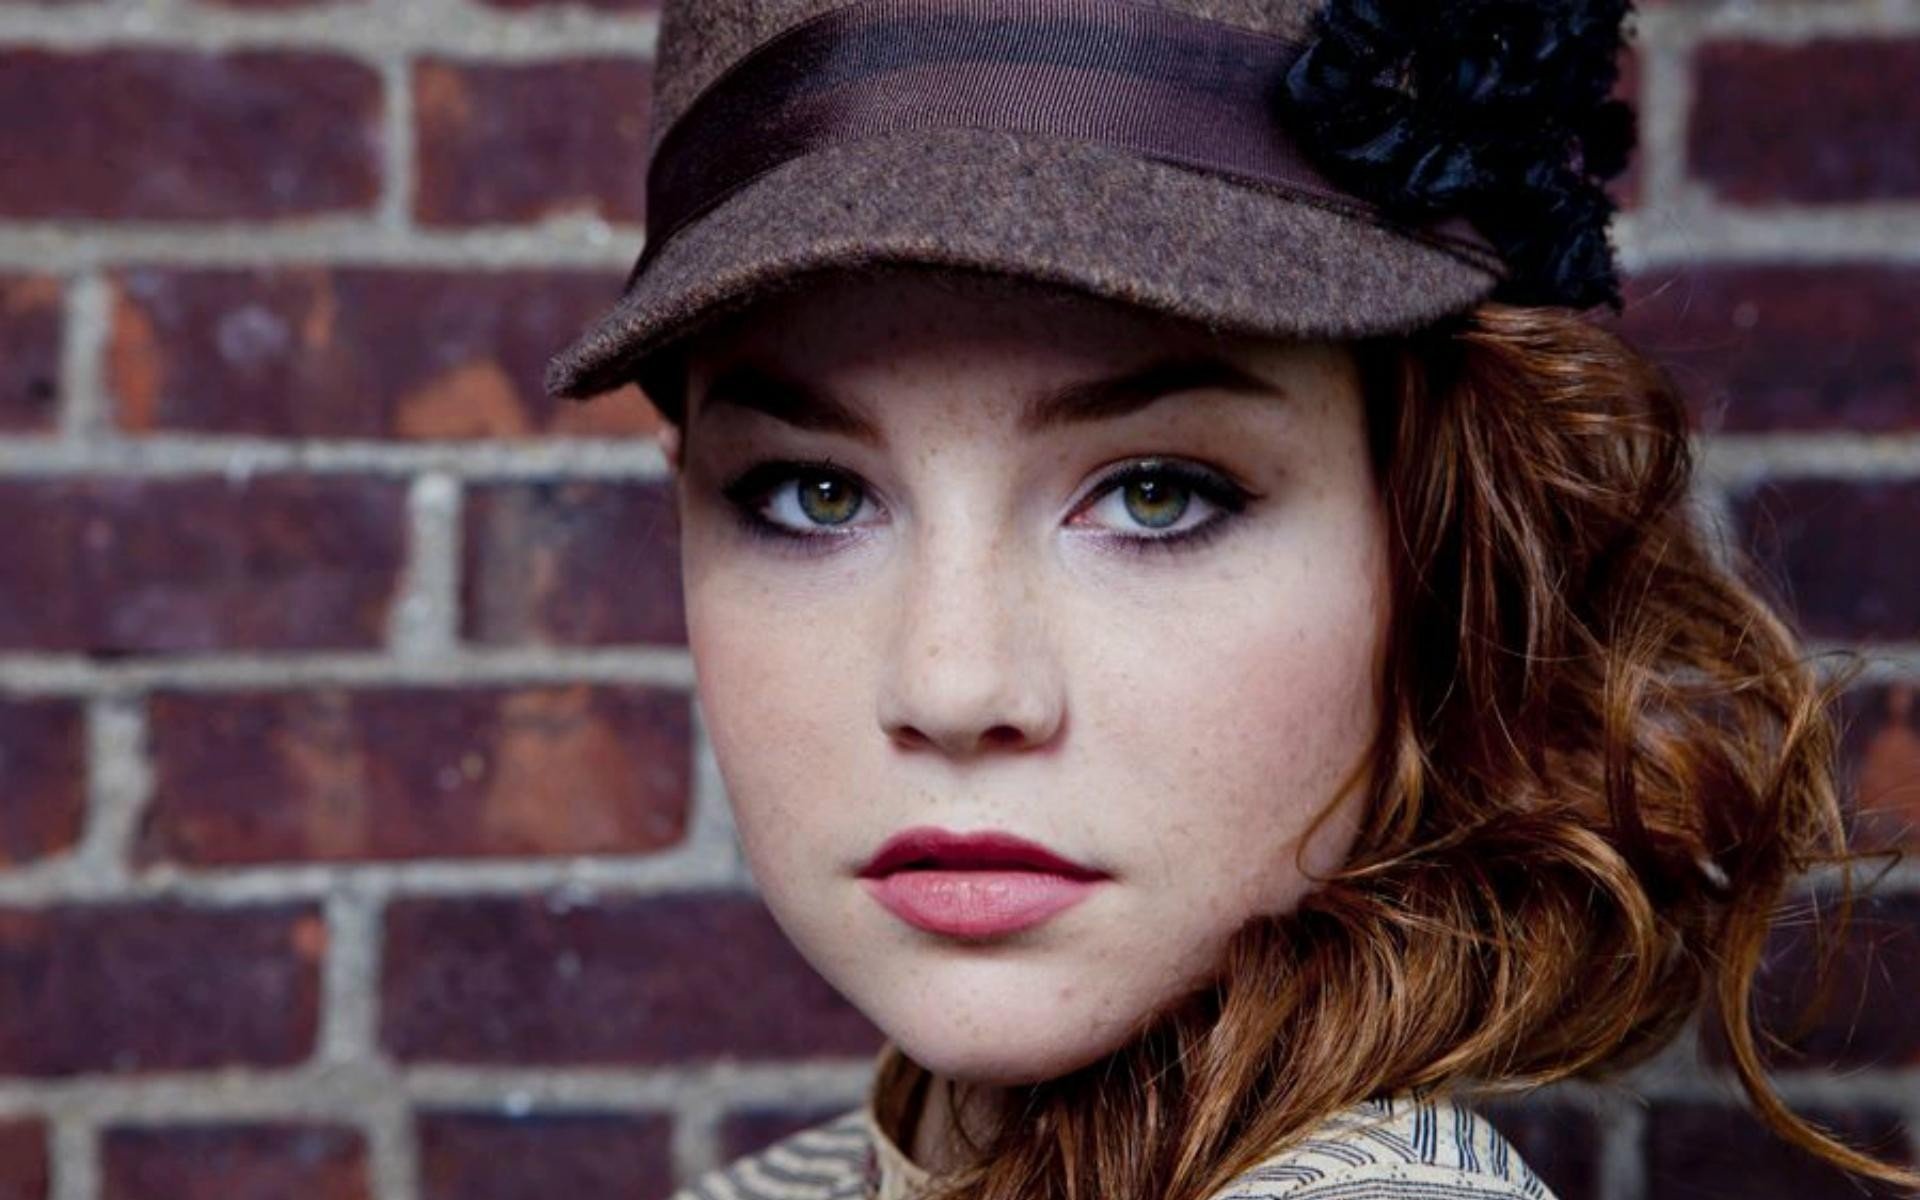 Wallpaper, women, redhead, model, looking at viewer, red, hat, bricks, fashion, fur, spring, Person, skin, clothing, head, Freya Mavor, color, girl, beauty, eye, woman, lady, hairstyle, portrait photography, photo shoot, brown